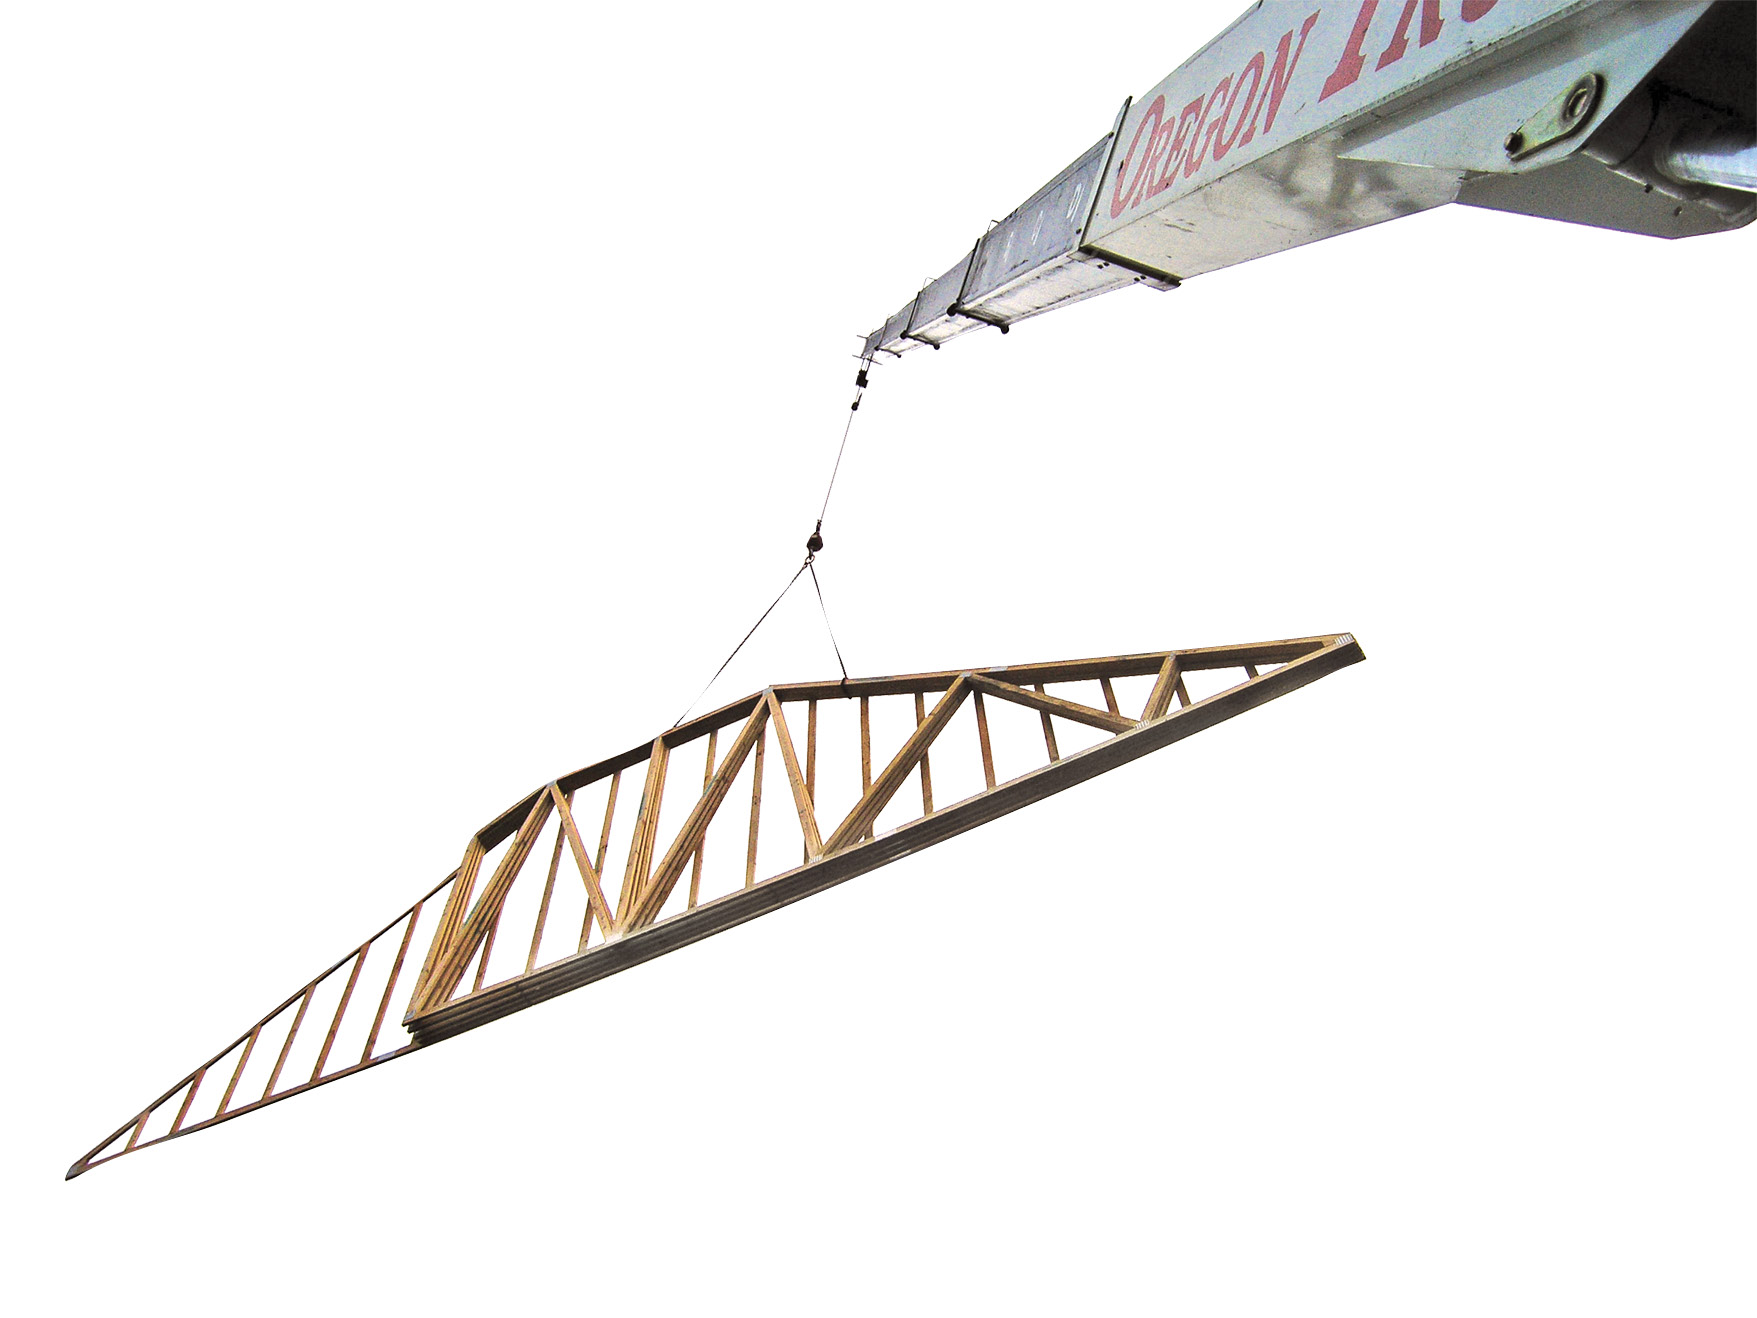 How to safely hoist long-span trusses